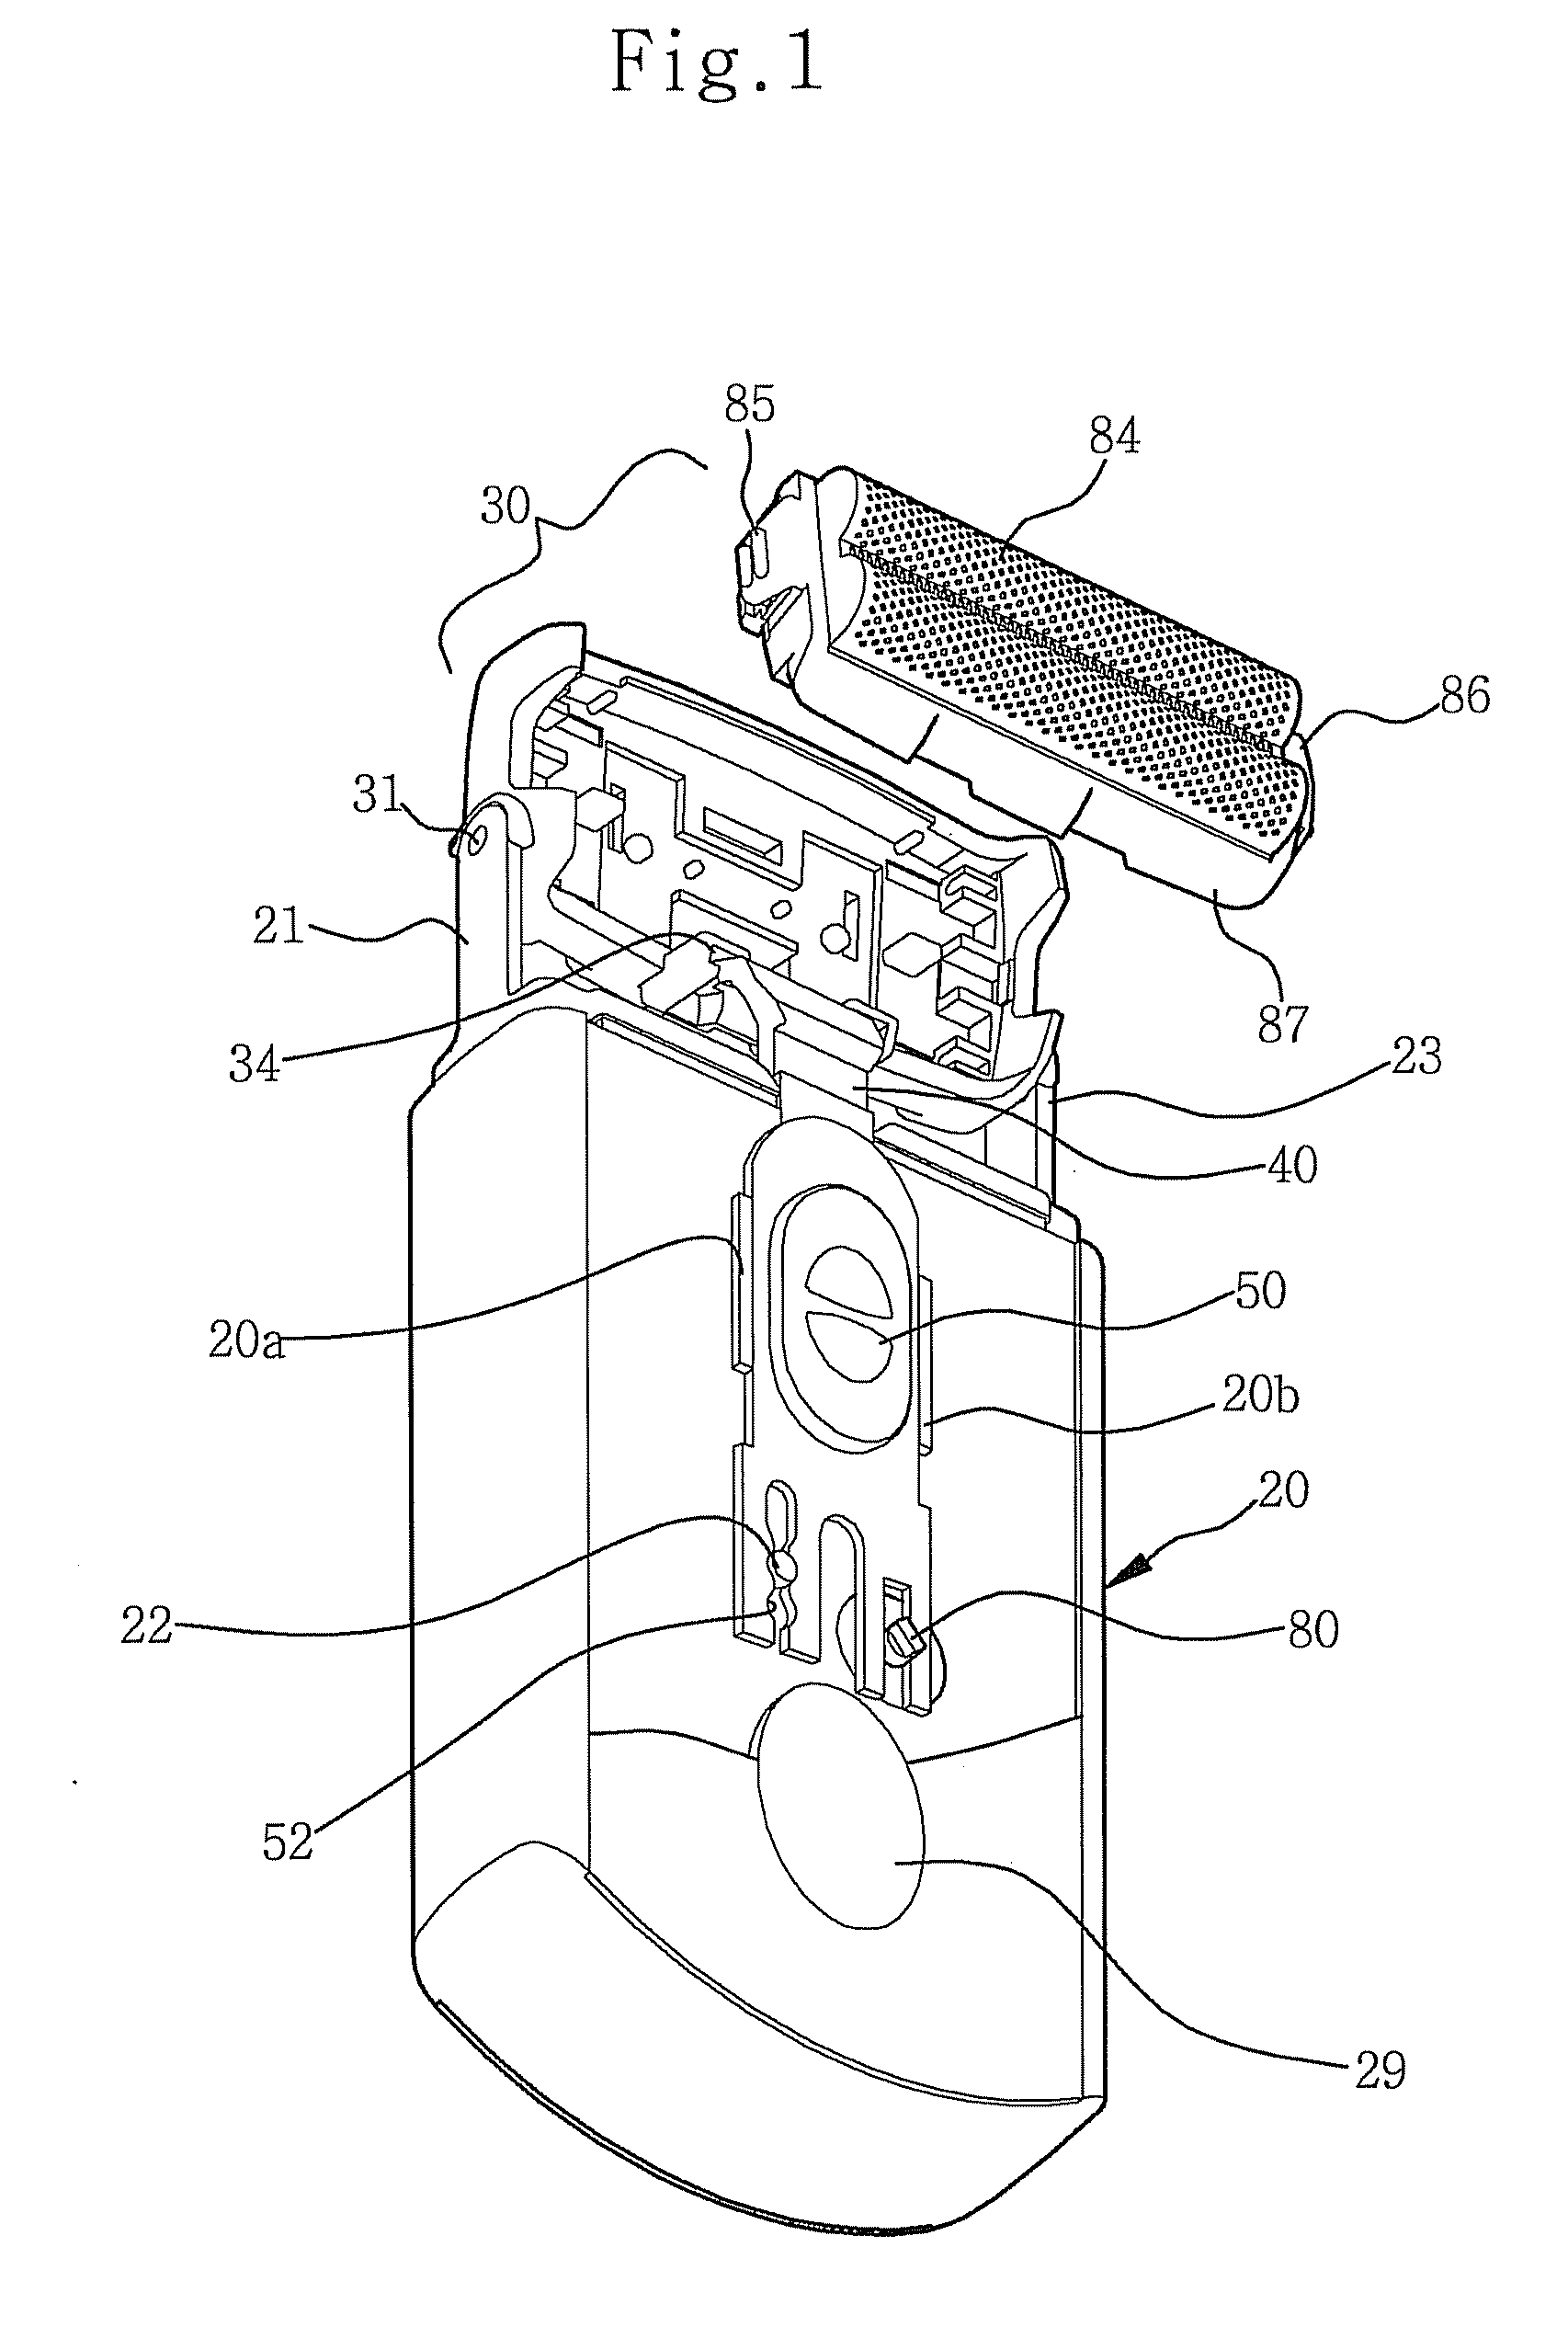 Head tilting device of electric shaver